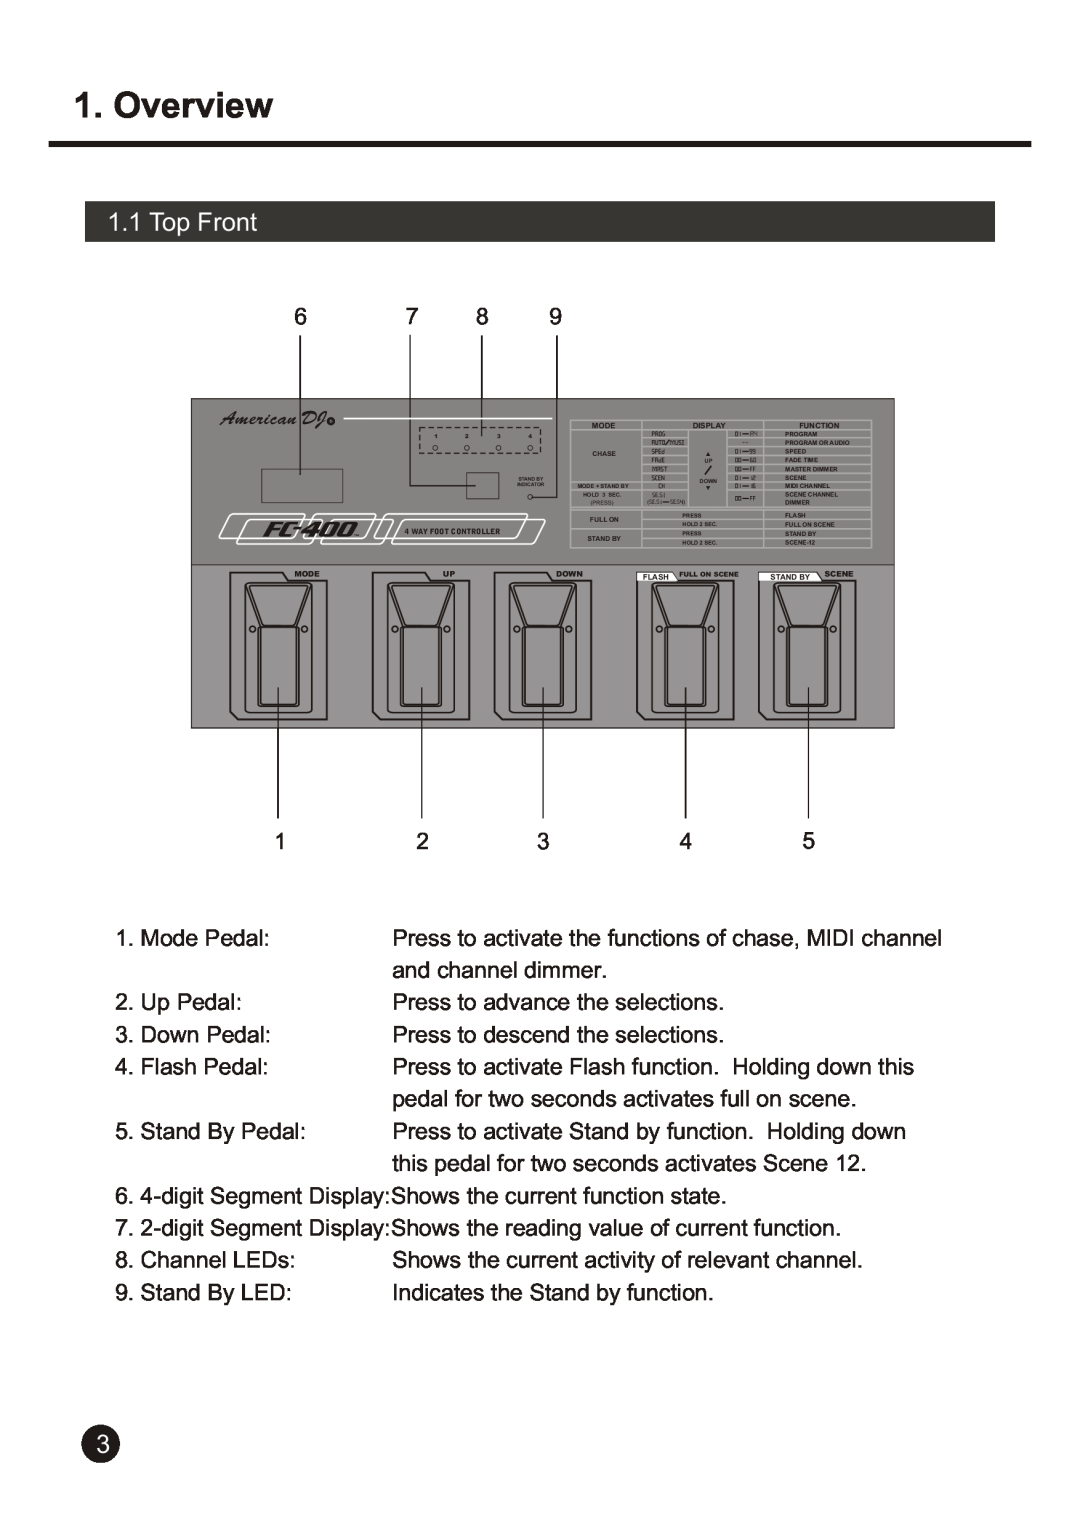 American DJ FC 400 user manual Overview, Top Front 